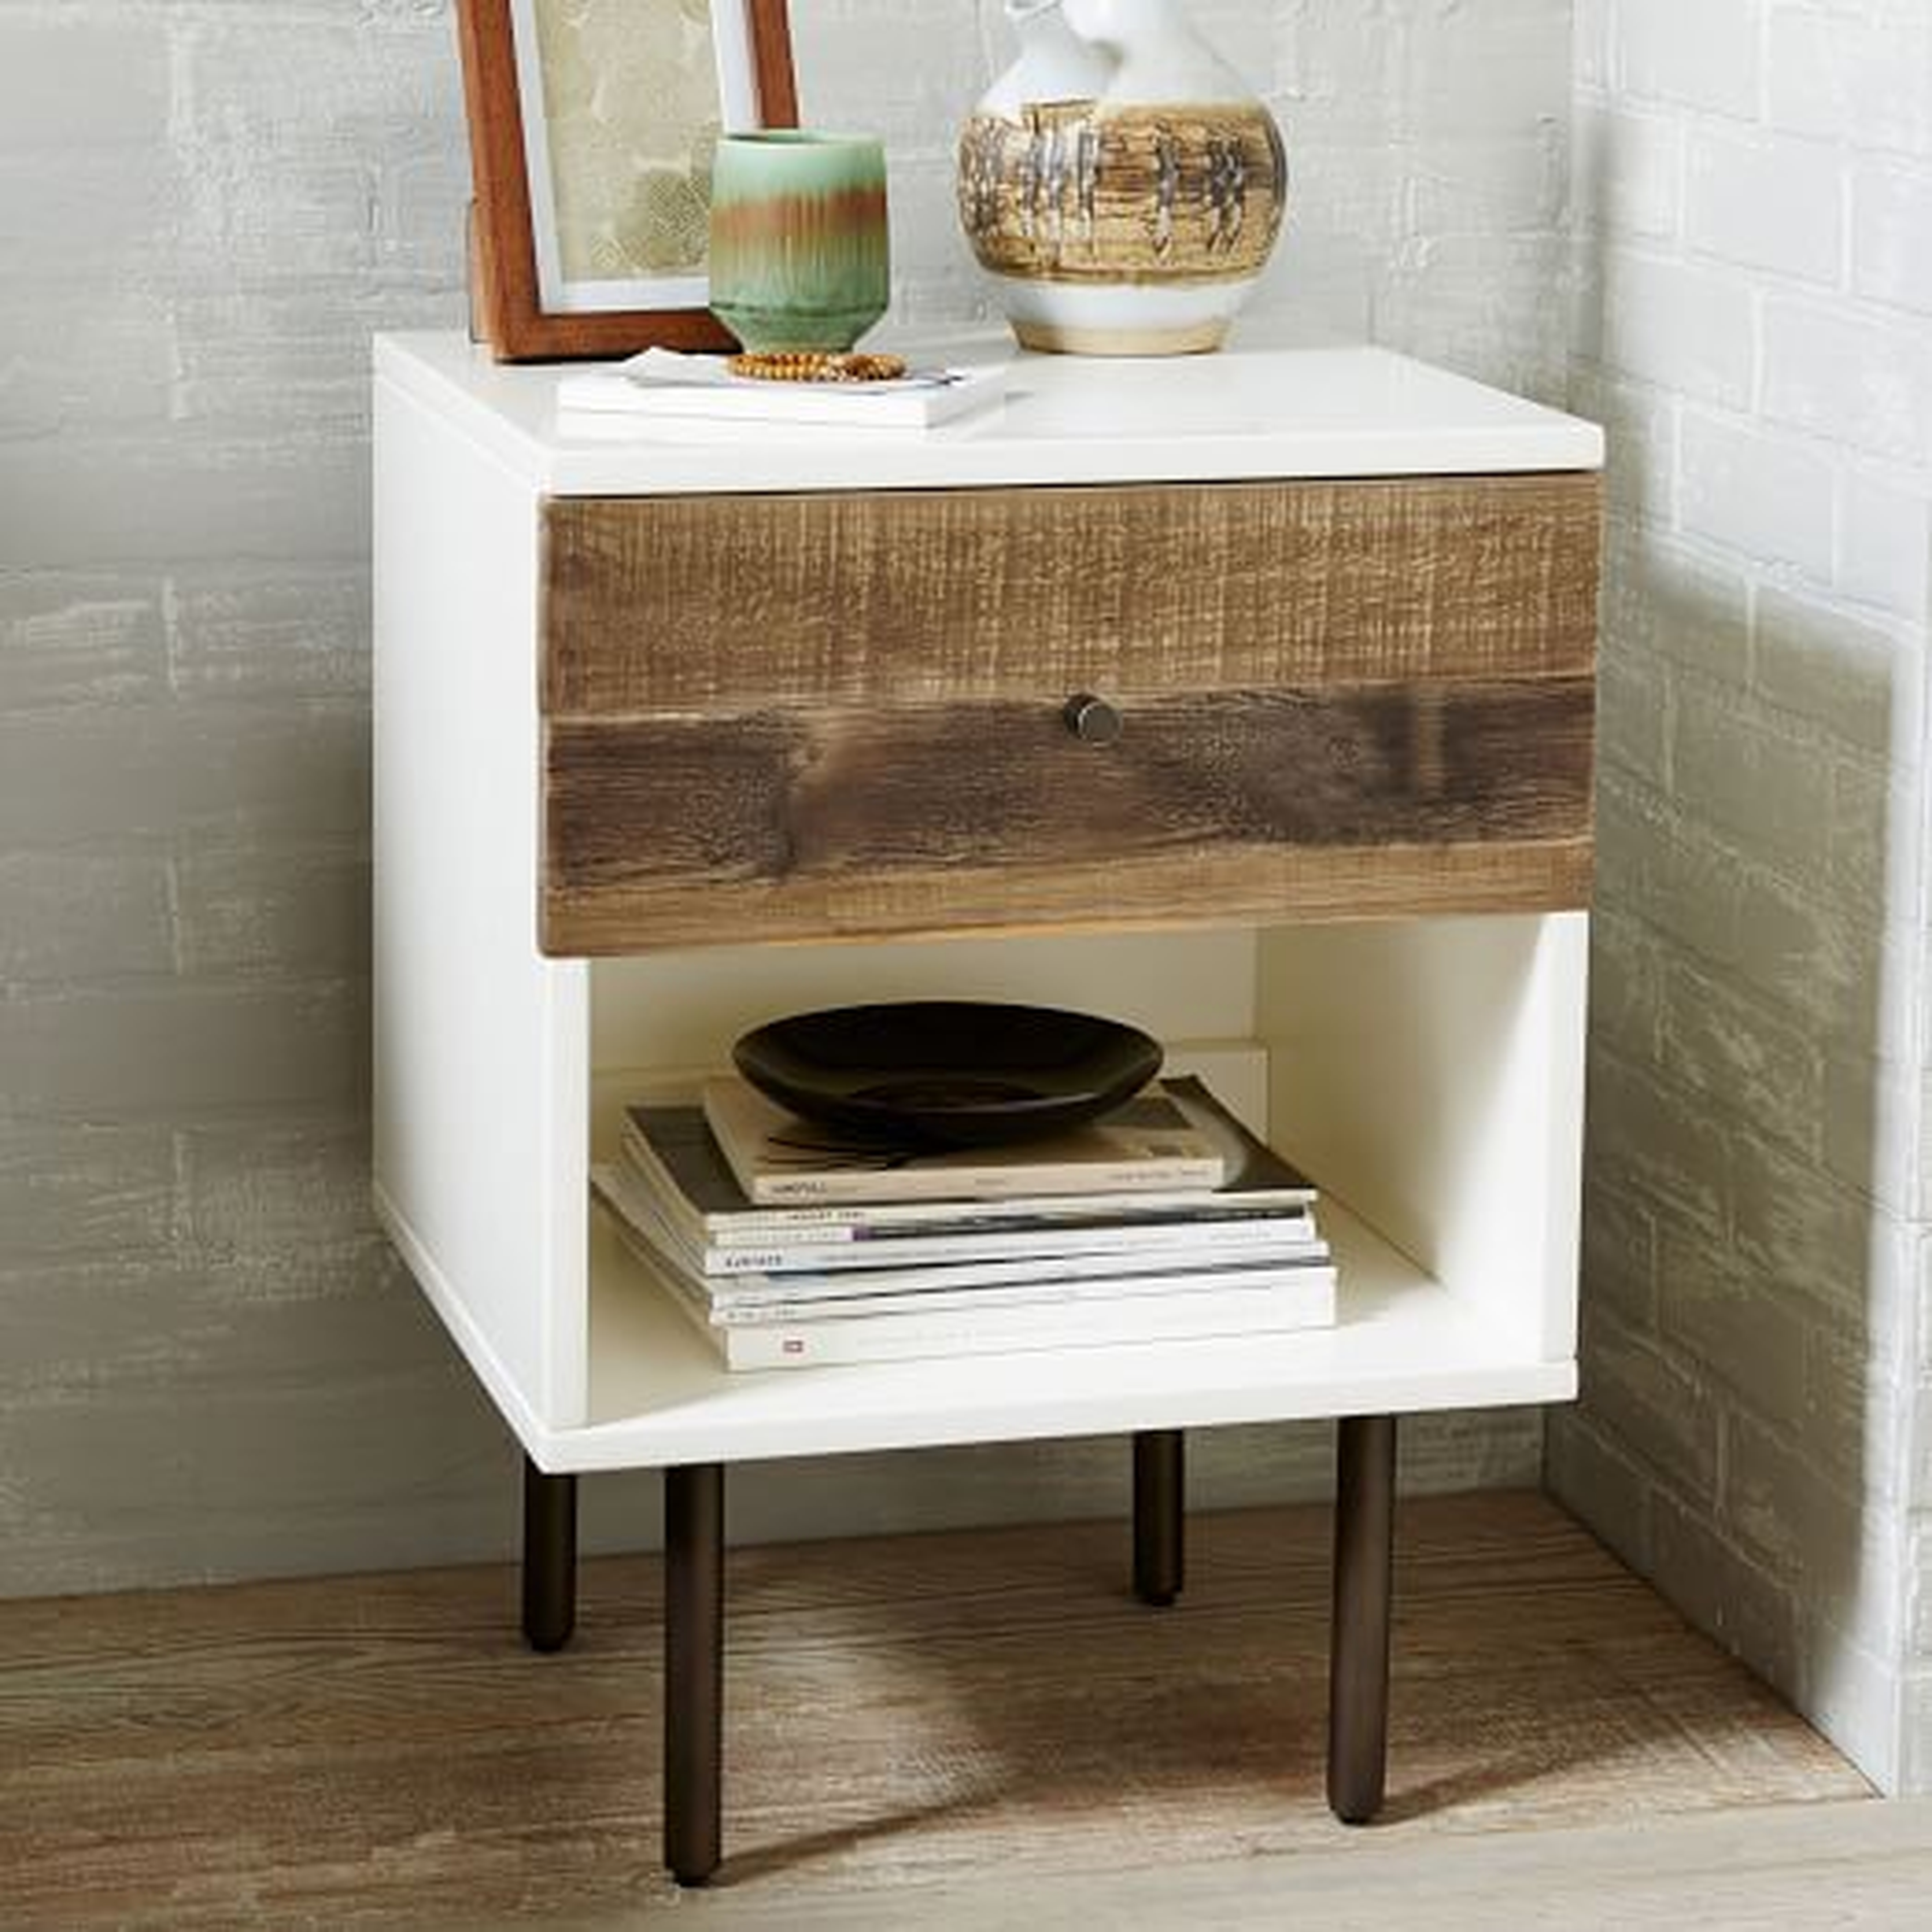 Reclaimed Wood + Lacquer Nightstand - West Elm